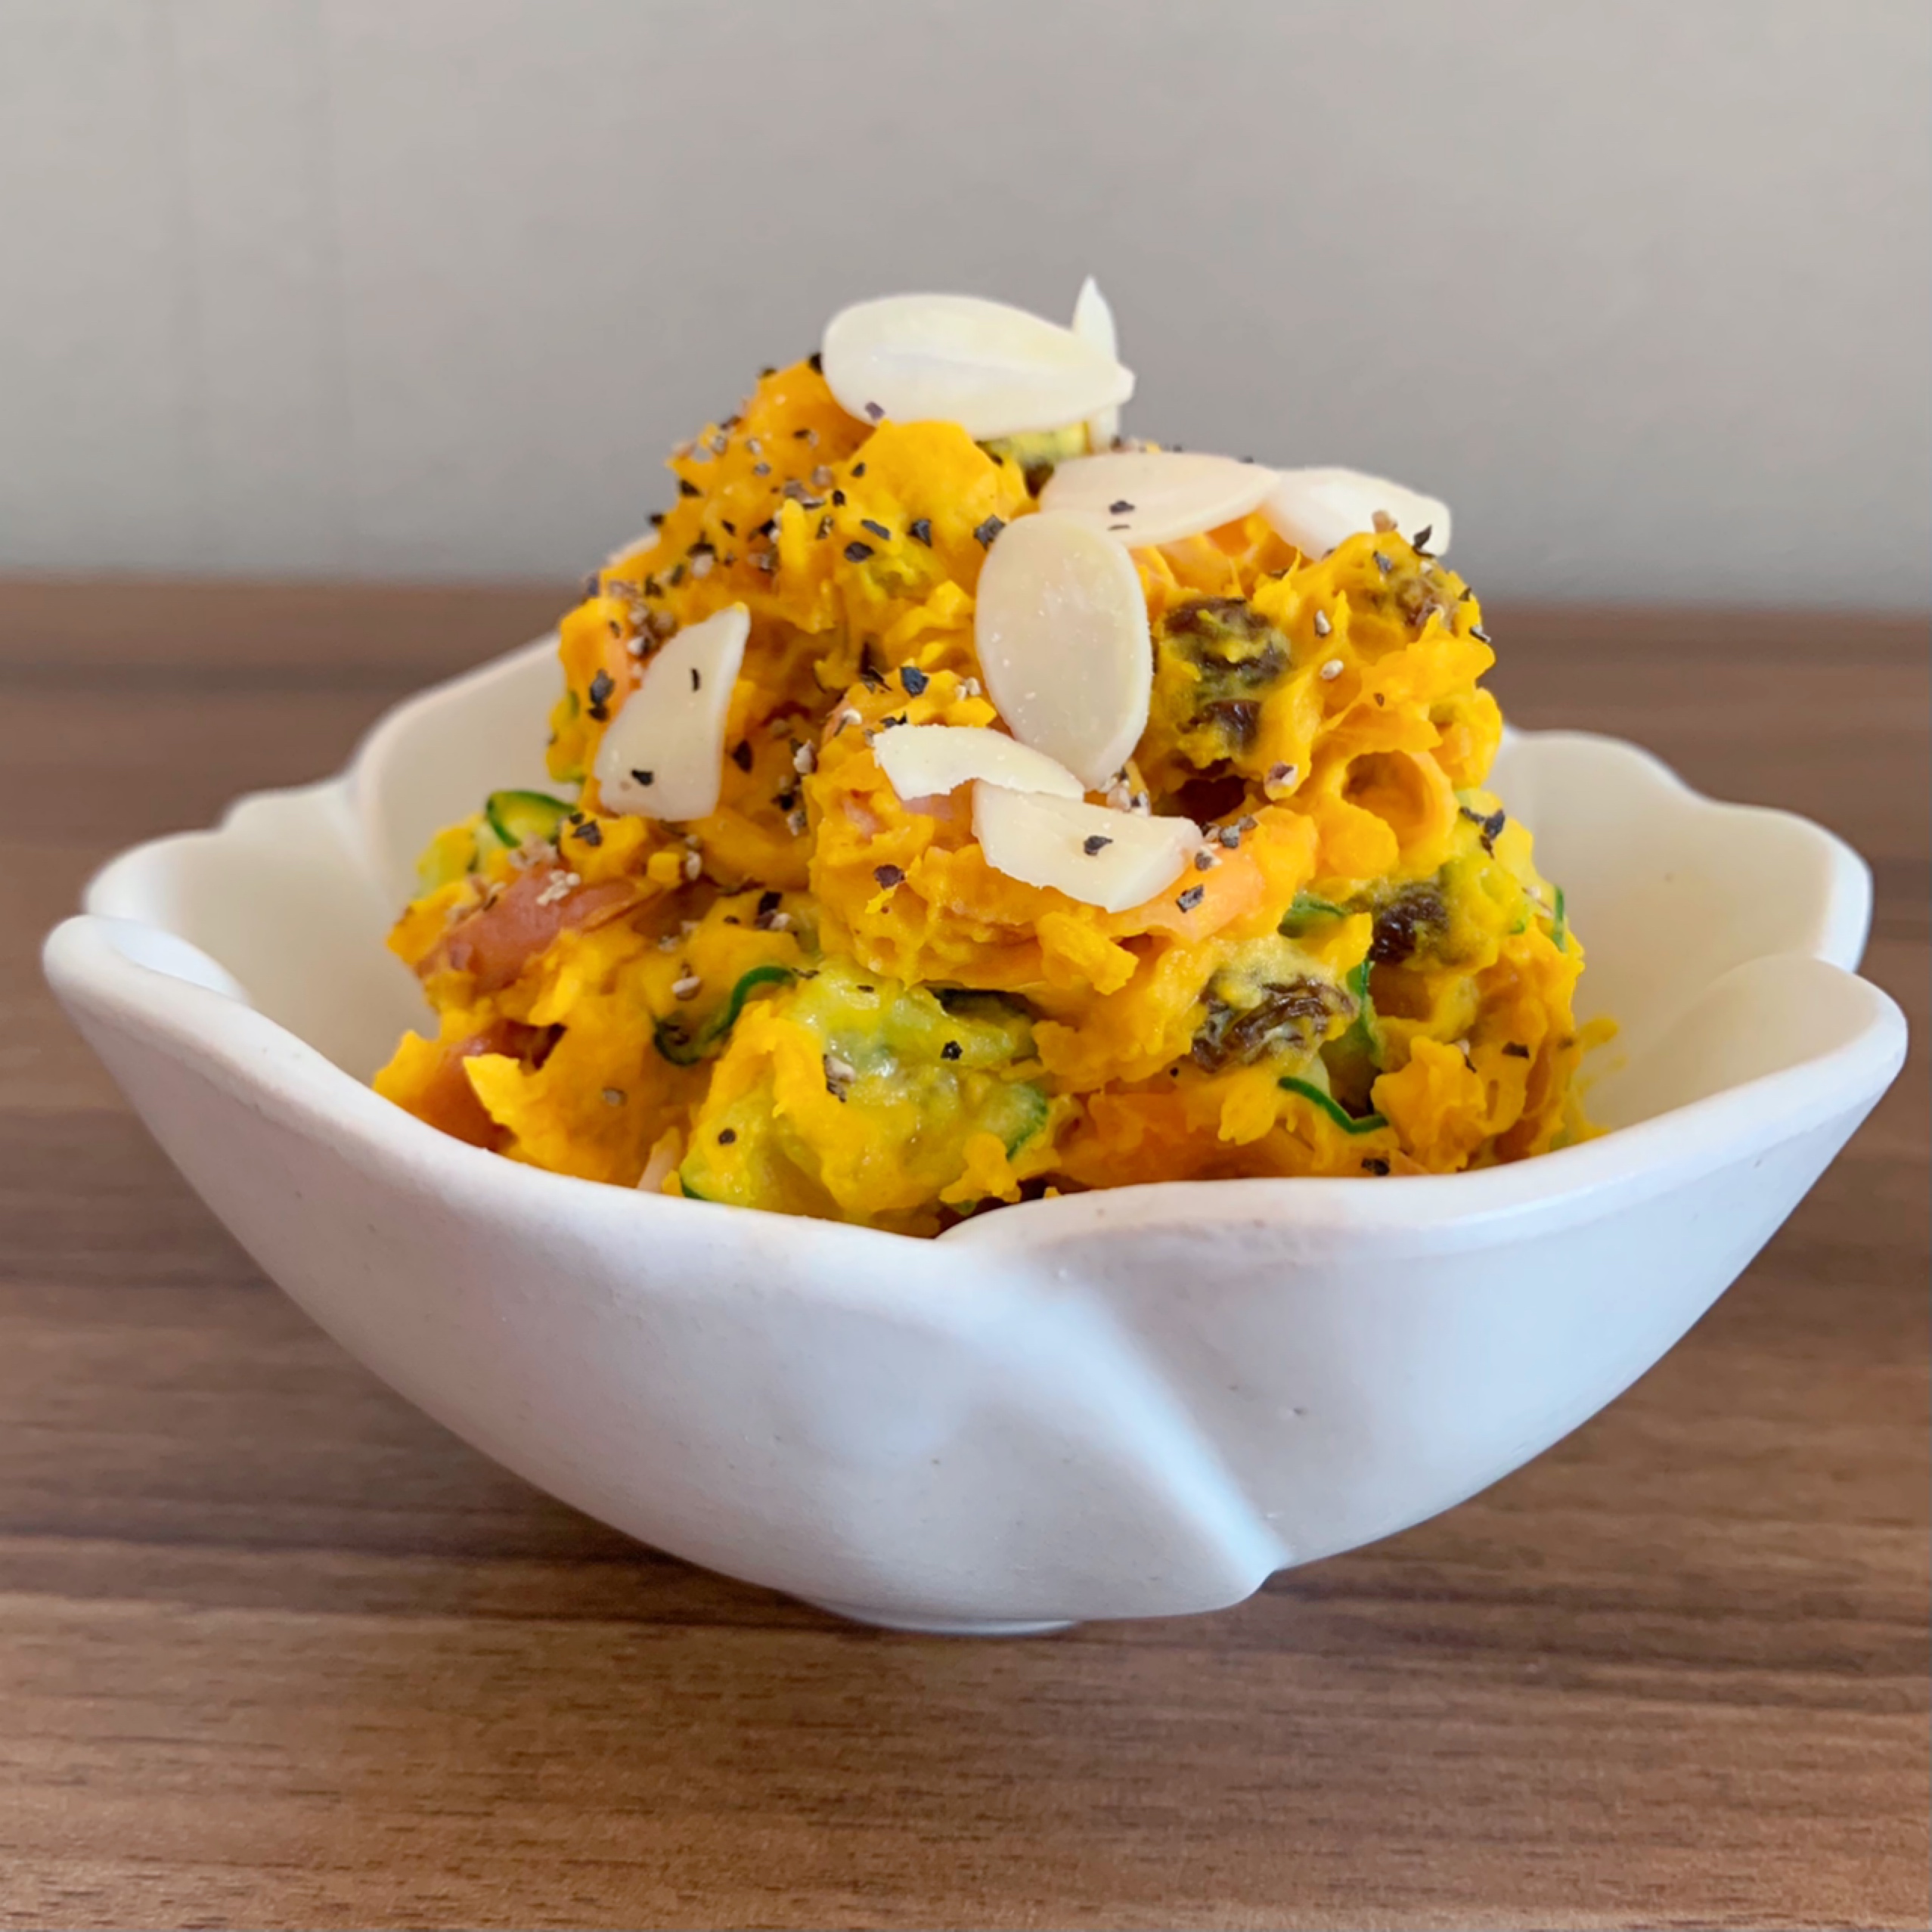 A salad made with pumpkin and mayonnaise that looks like a side dish from a department store.